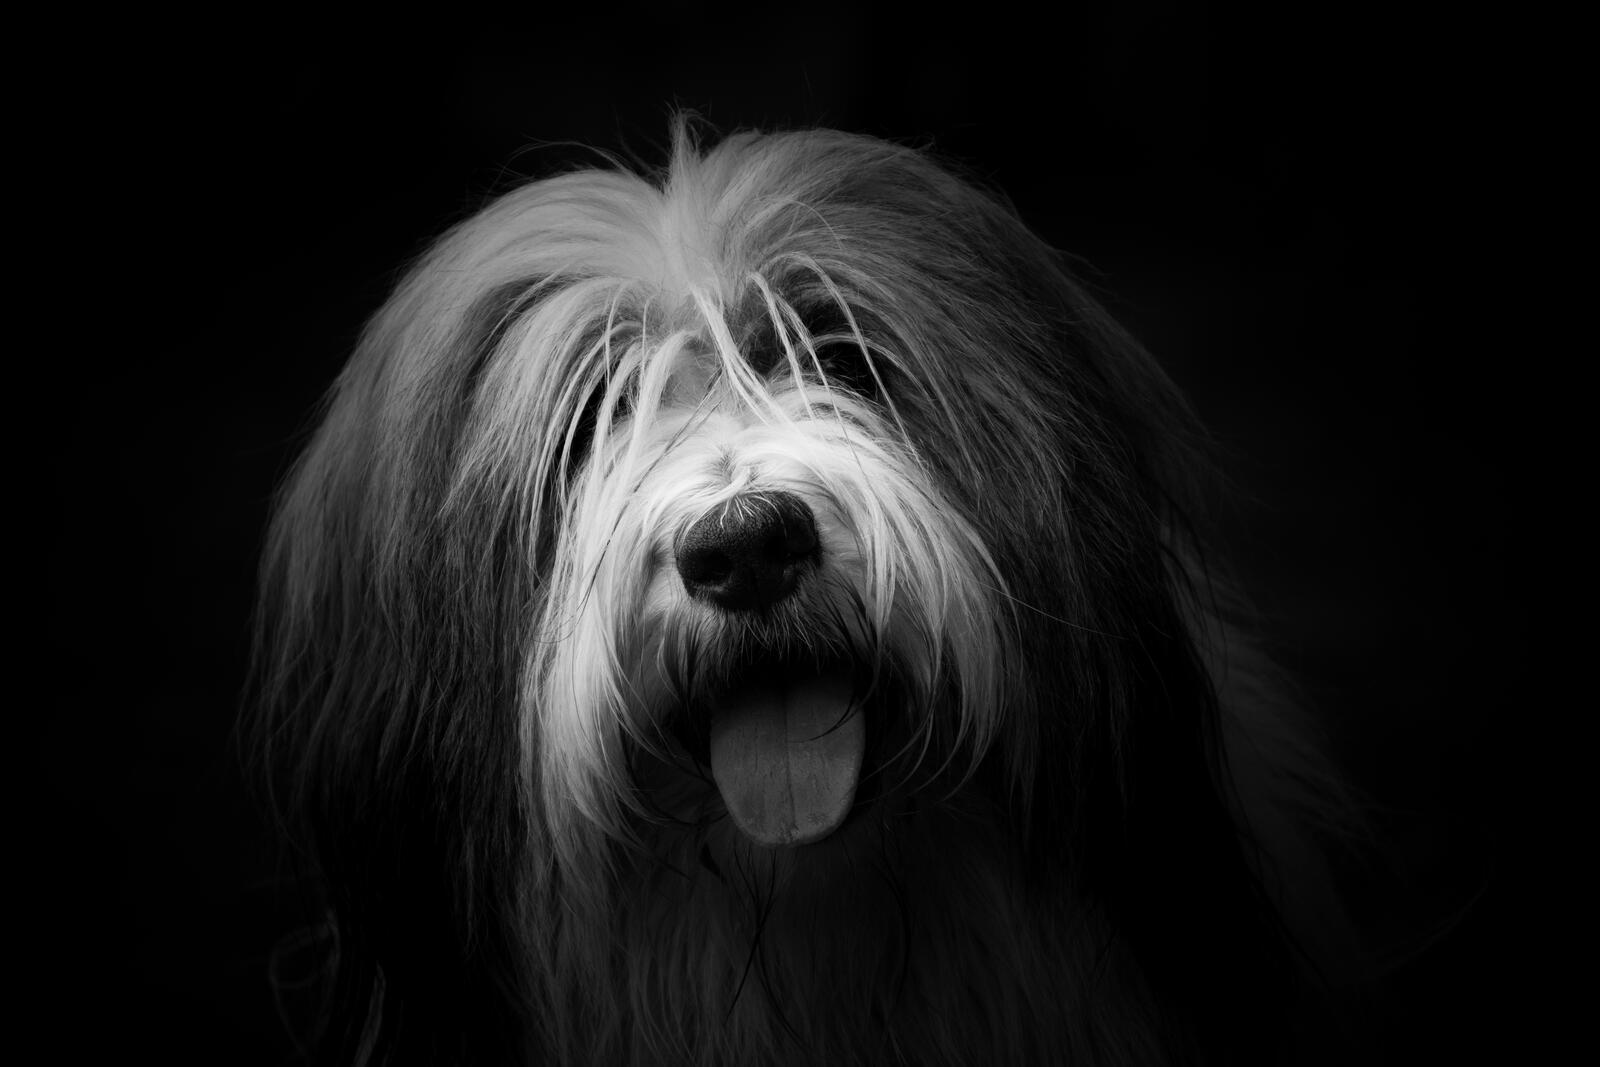 Free photo A hairy dog in a monochrome photo